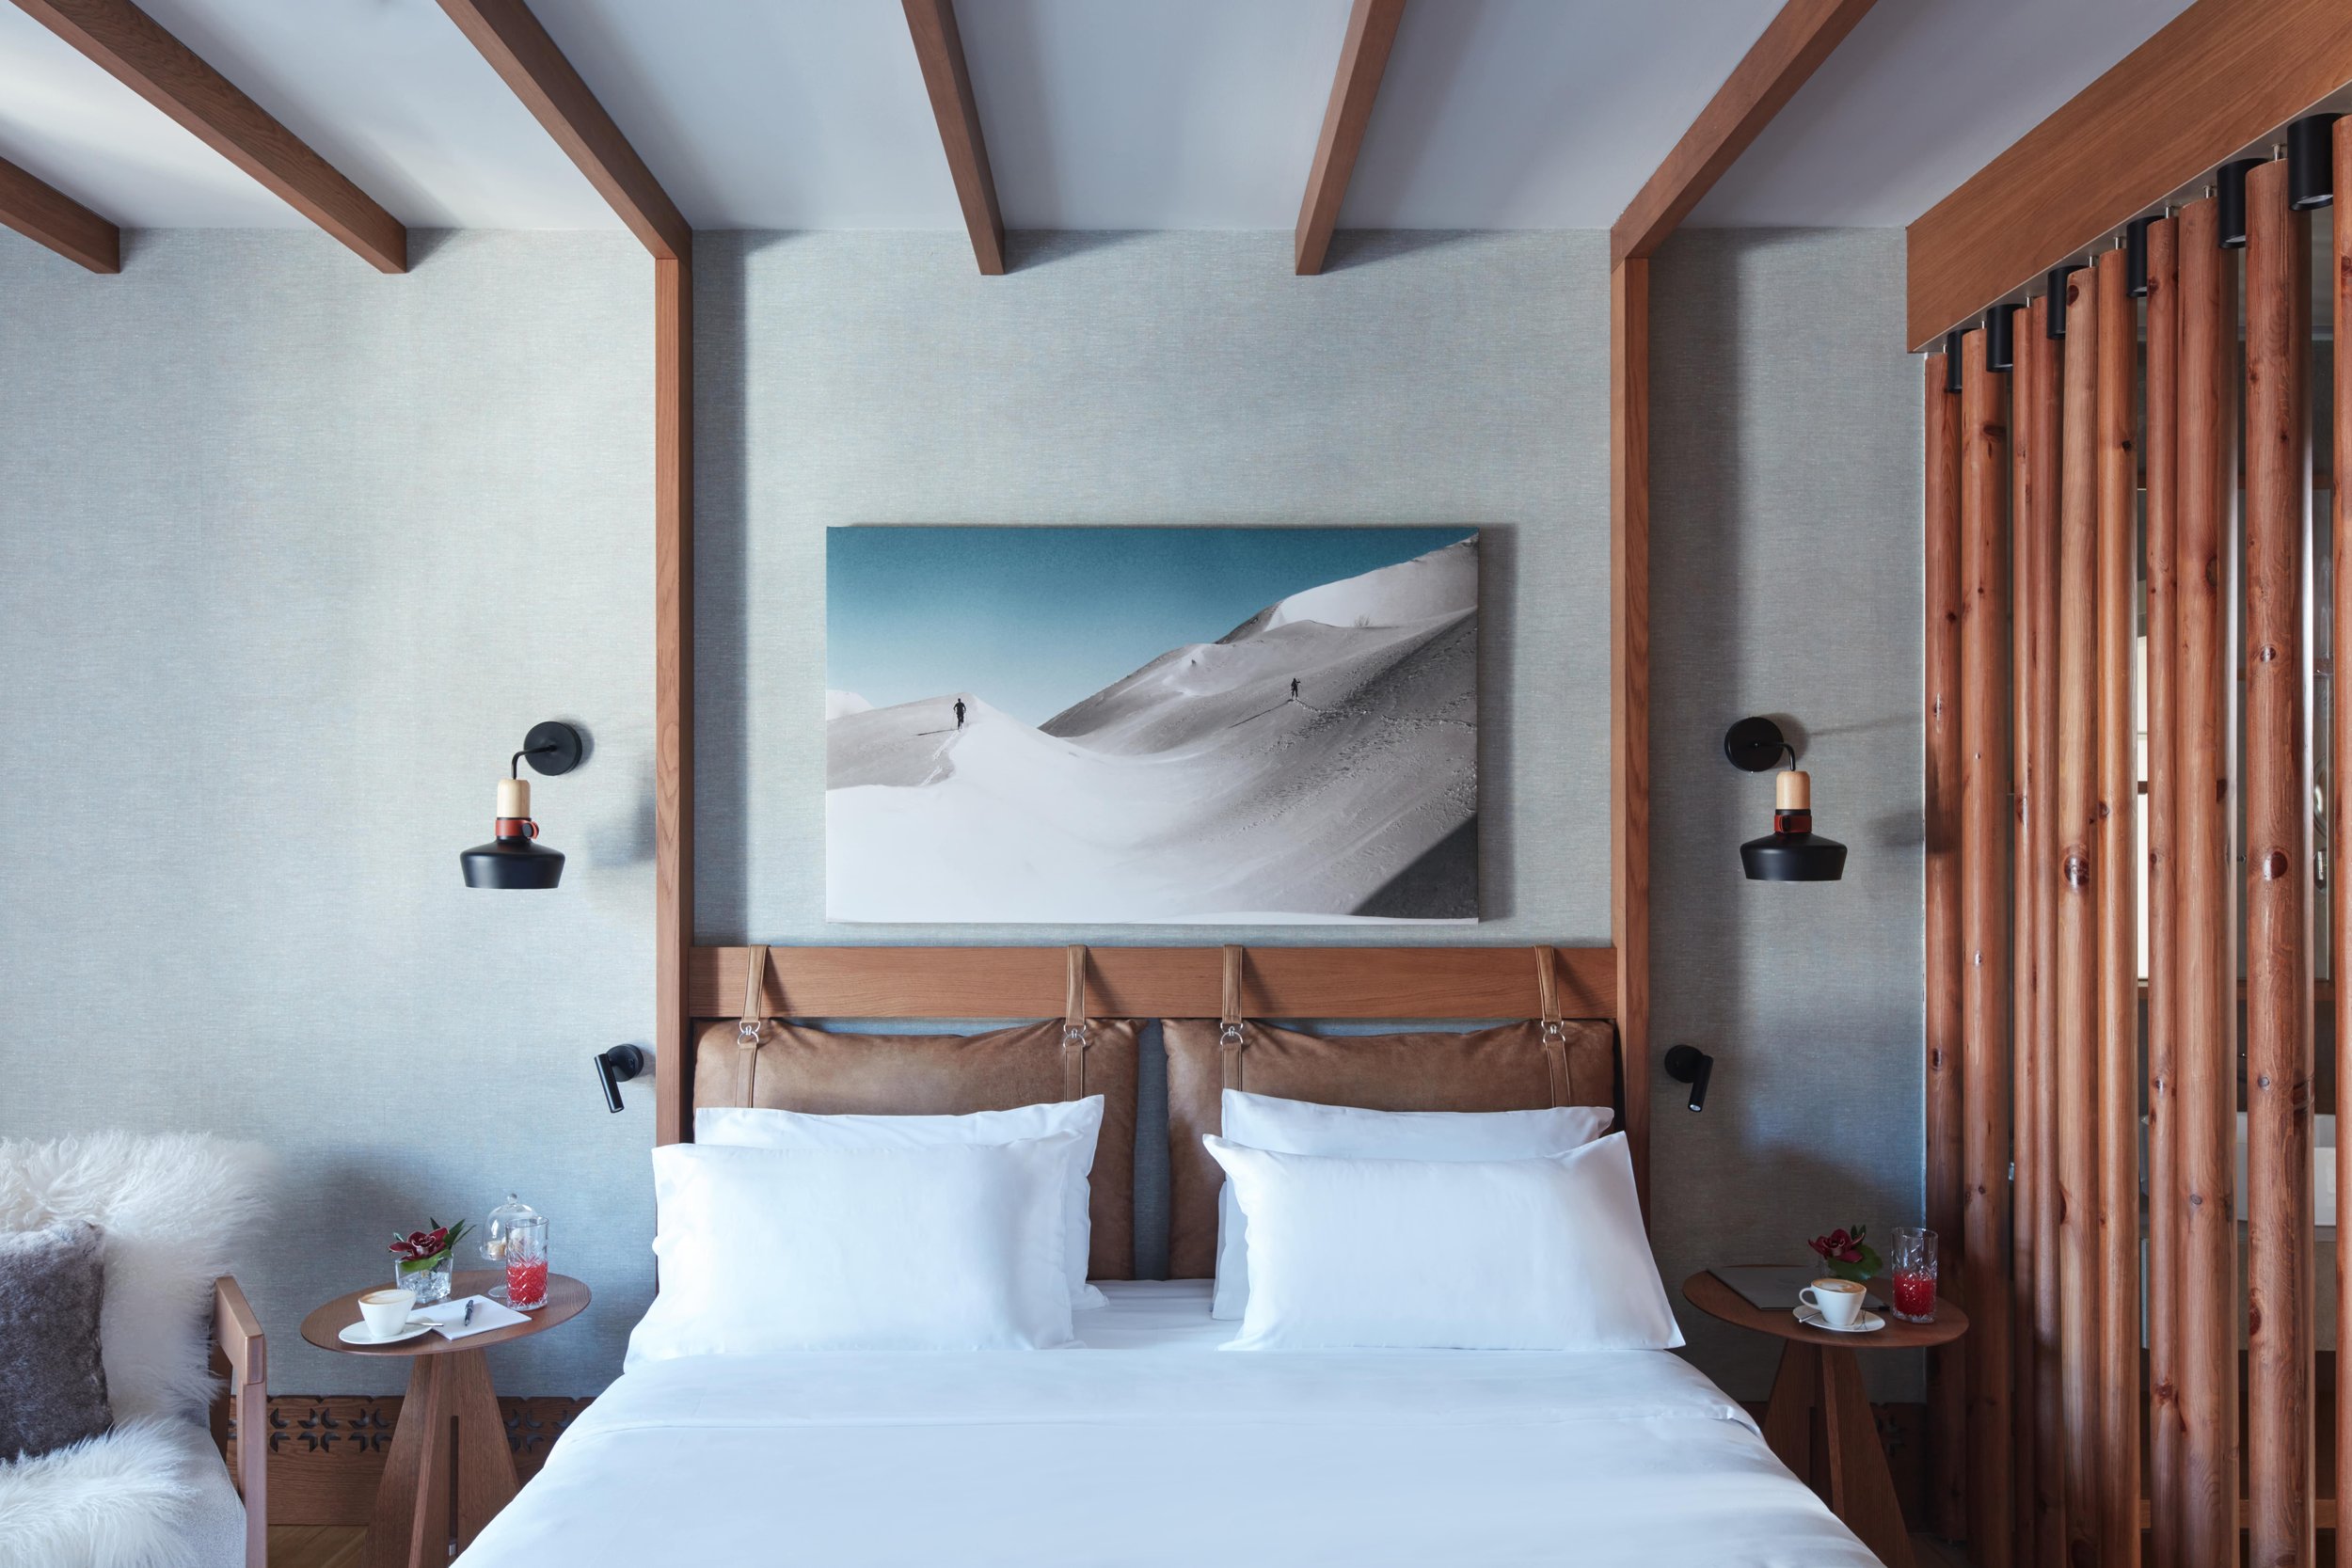 Grand hotel Savoia bed with a canvas of mountains covered in snow above bed frame 